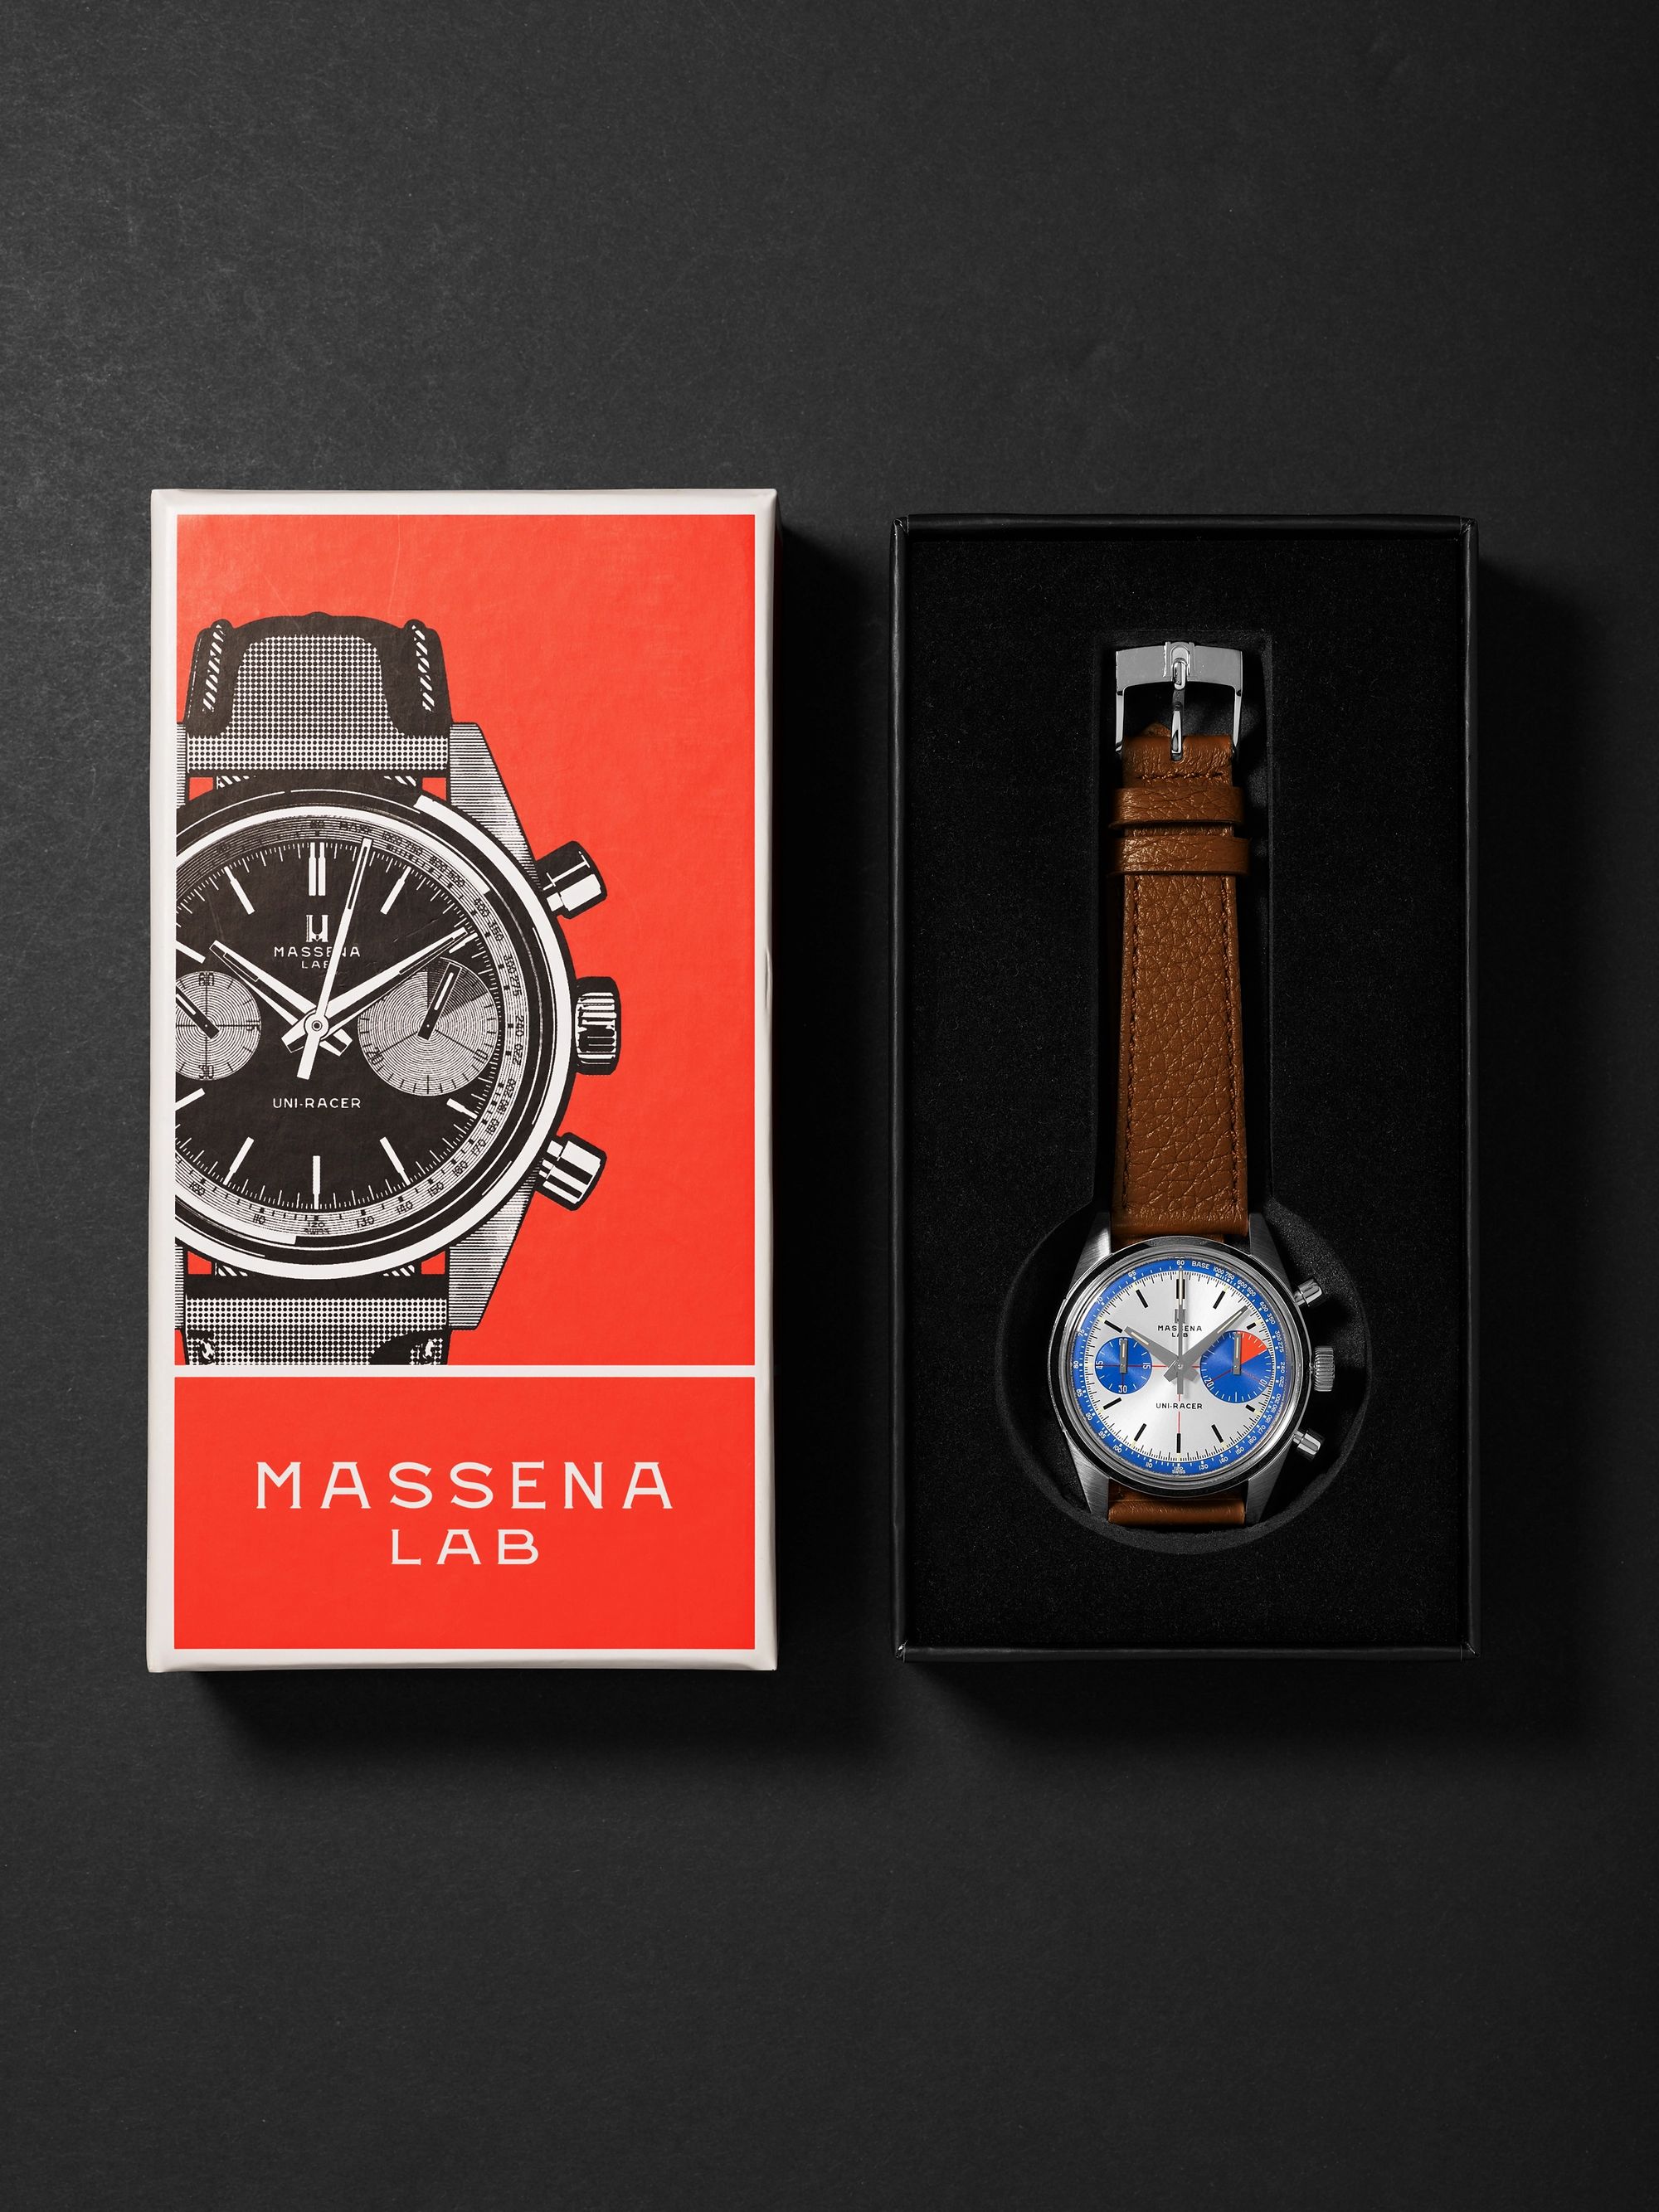 MASSENA LAB Uni-Racer Limited Edition Hand-Wound Chronograph 39mm Stainless Steel and Full-Grain Leather Watch, Ref. No. UR-003-RAL